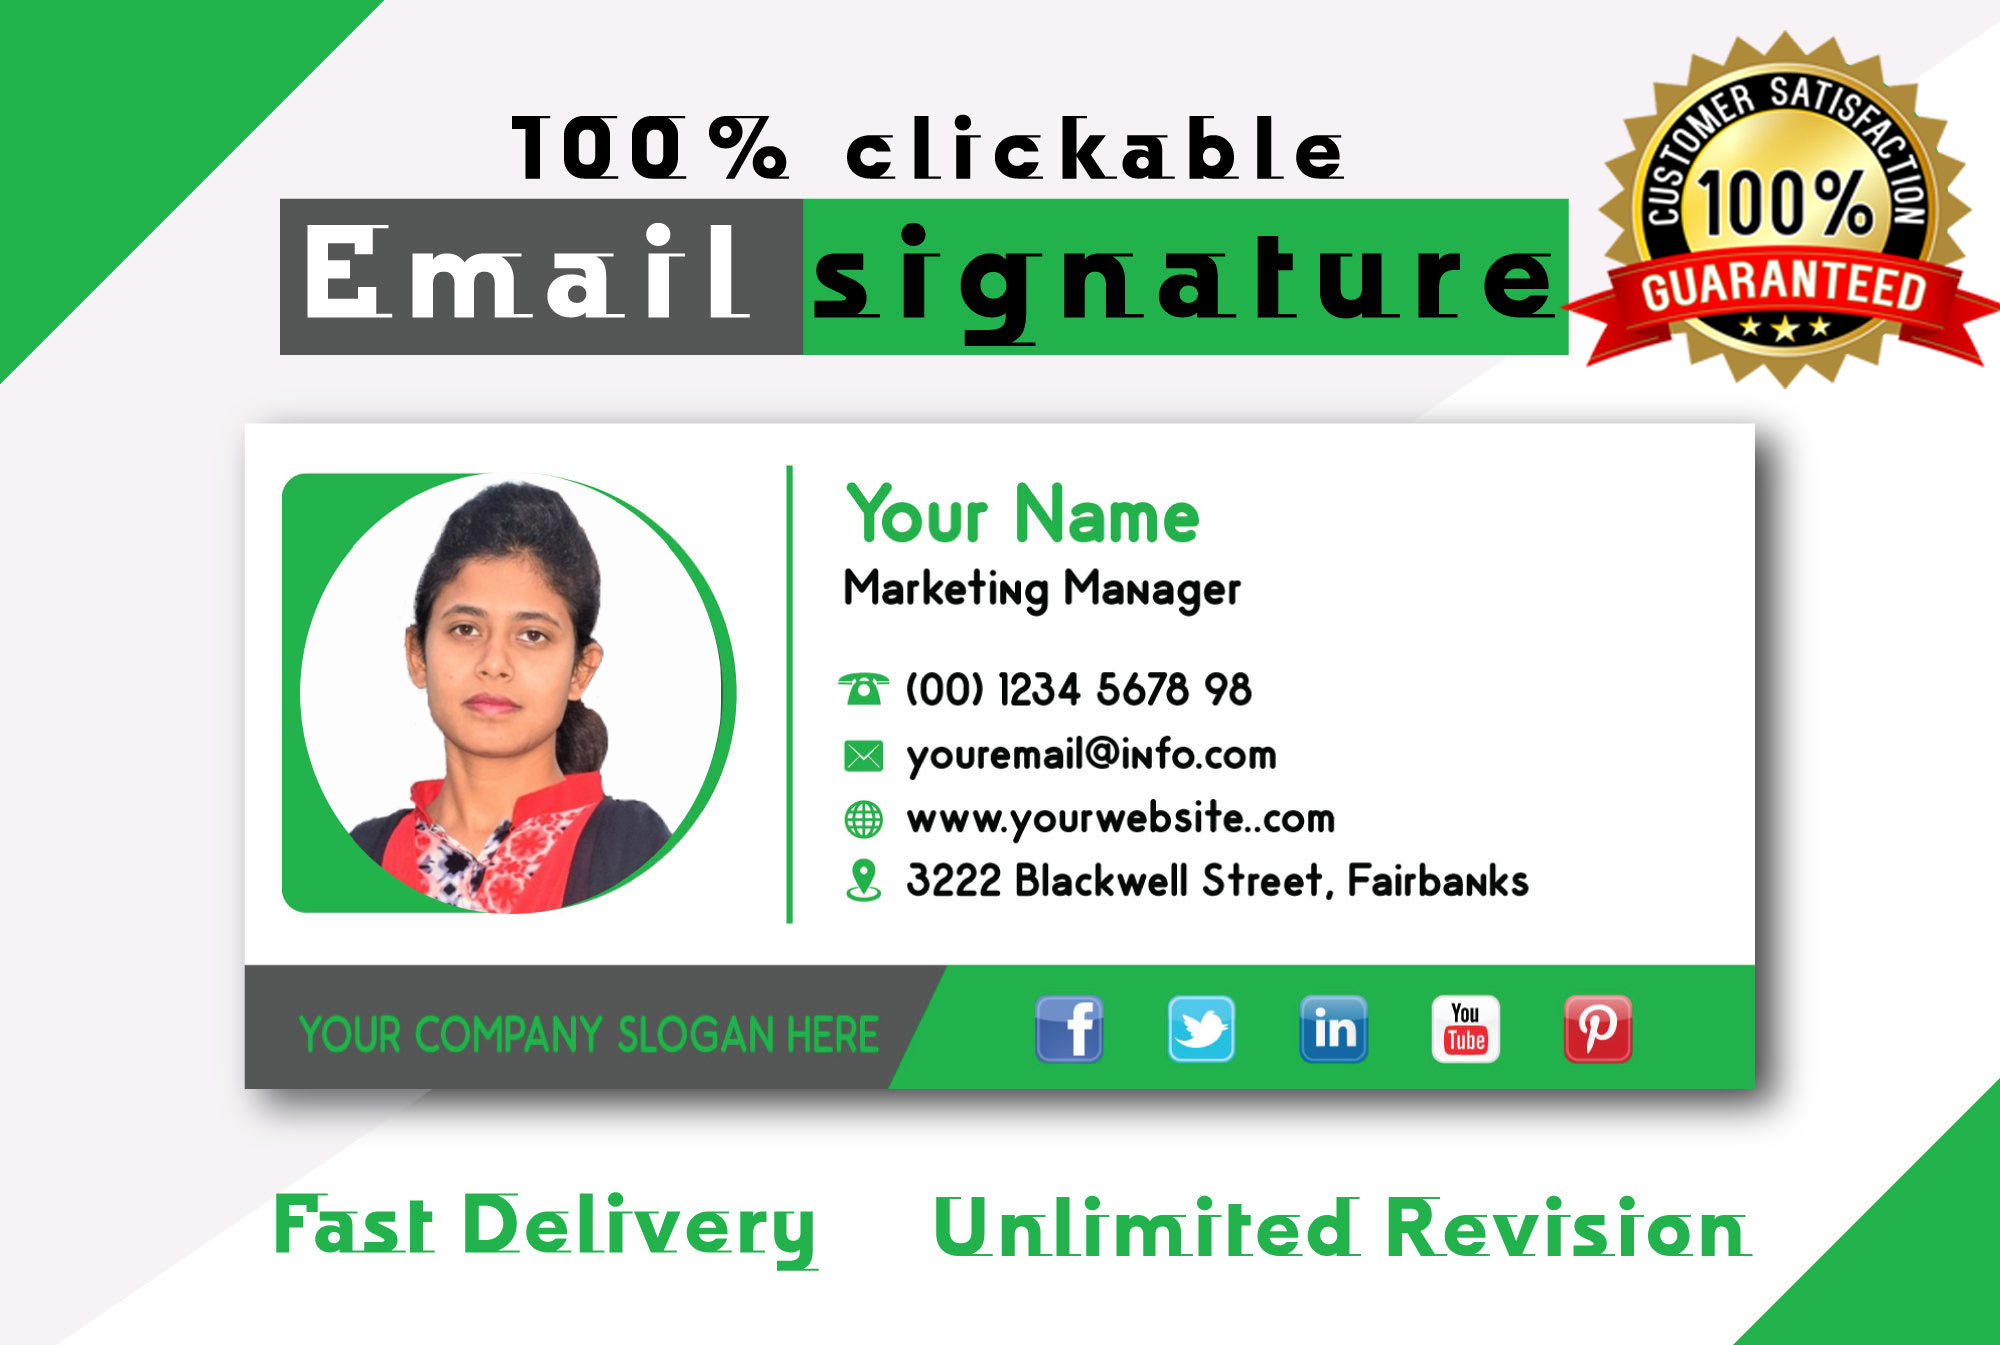 I will make a clickable email signature for outlook, gmail etc